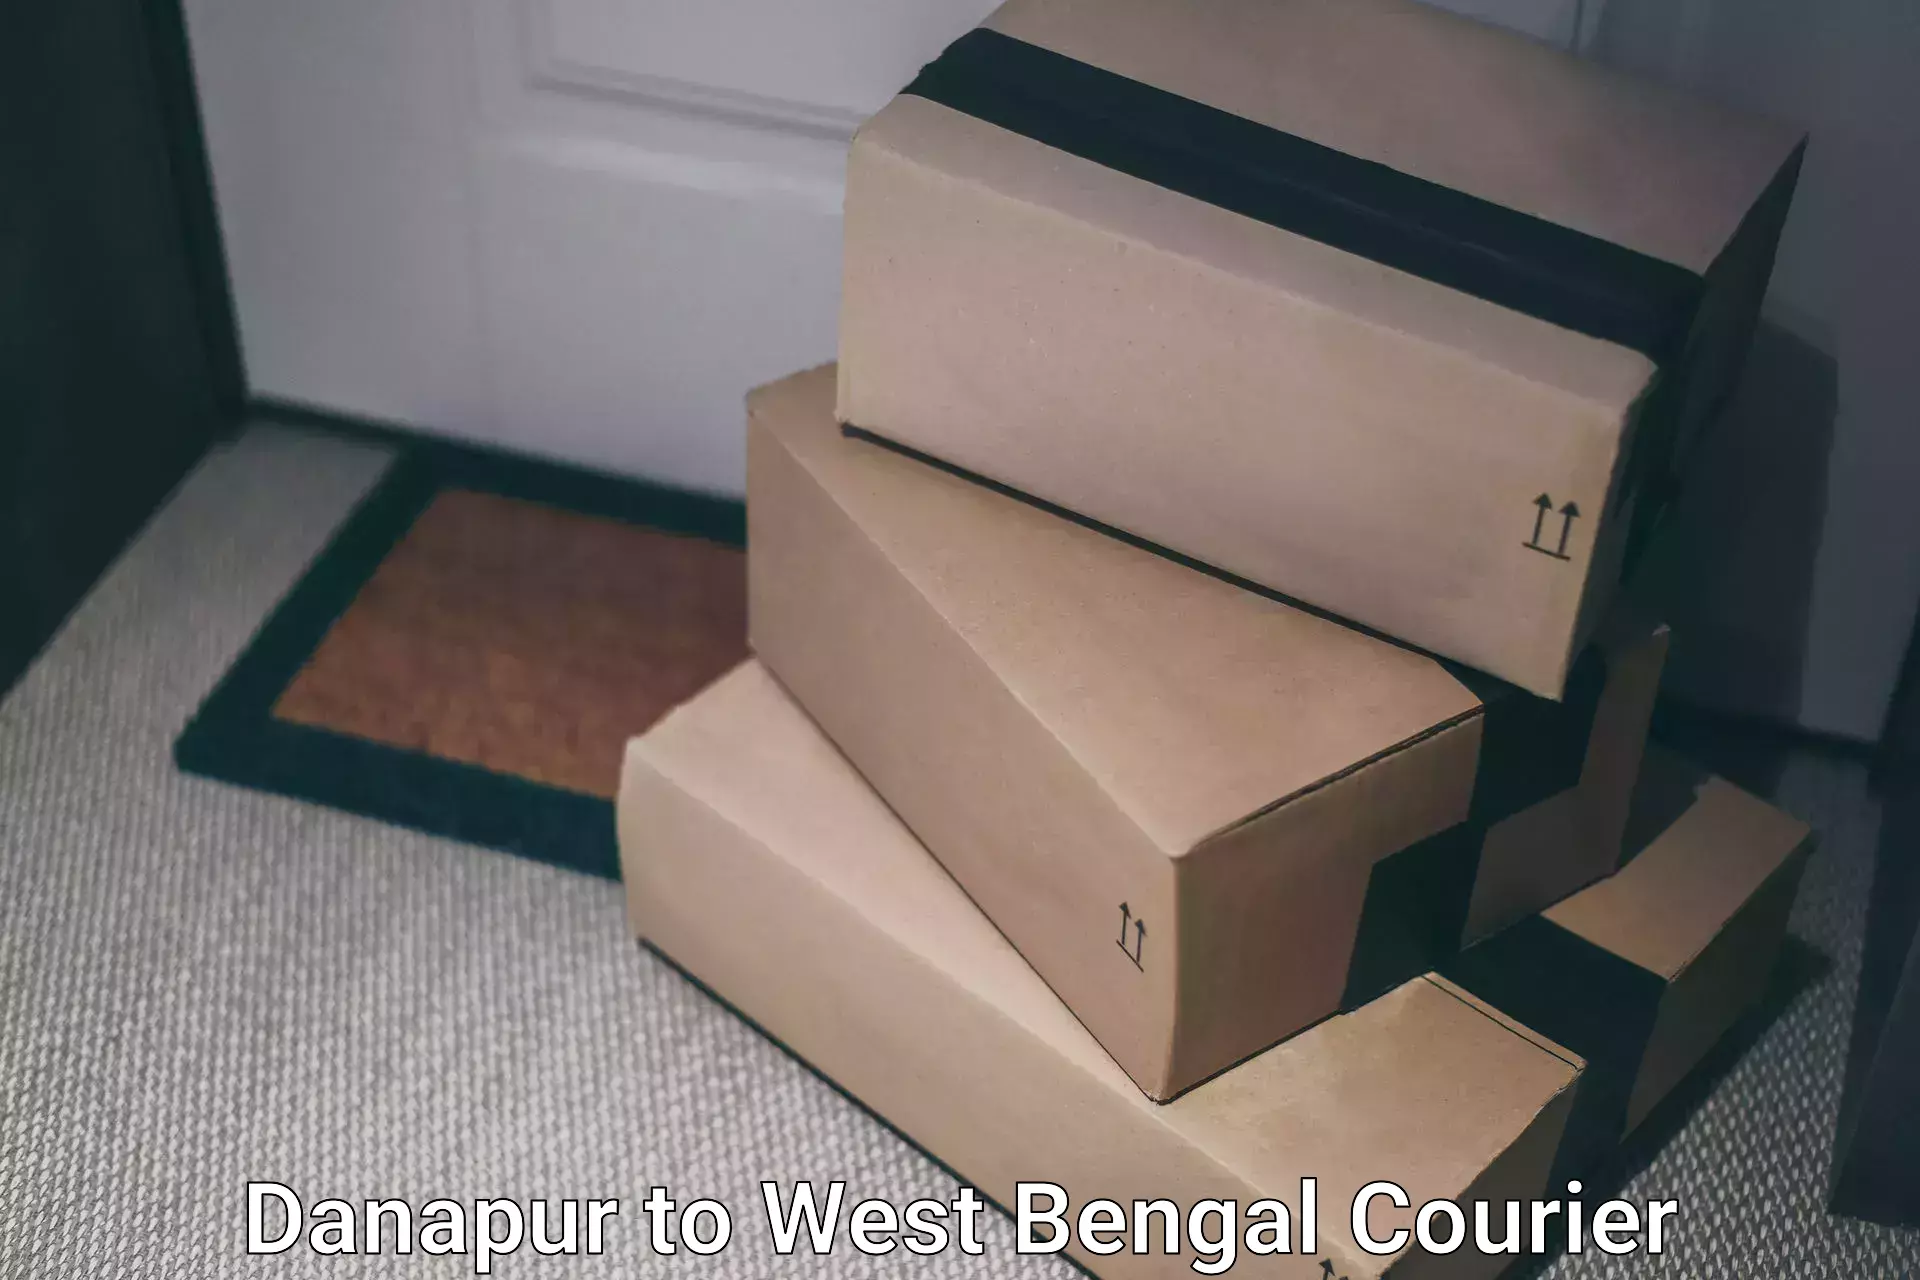 High-capacity shipping options Danapur to West Bengal